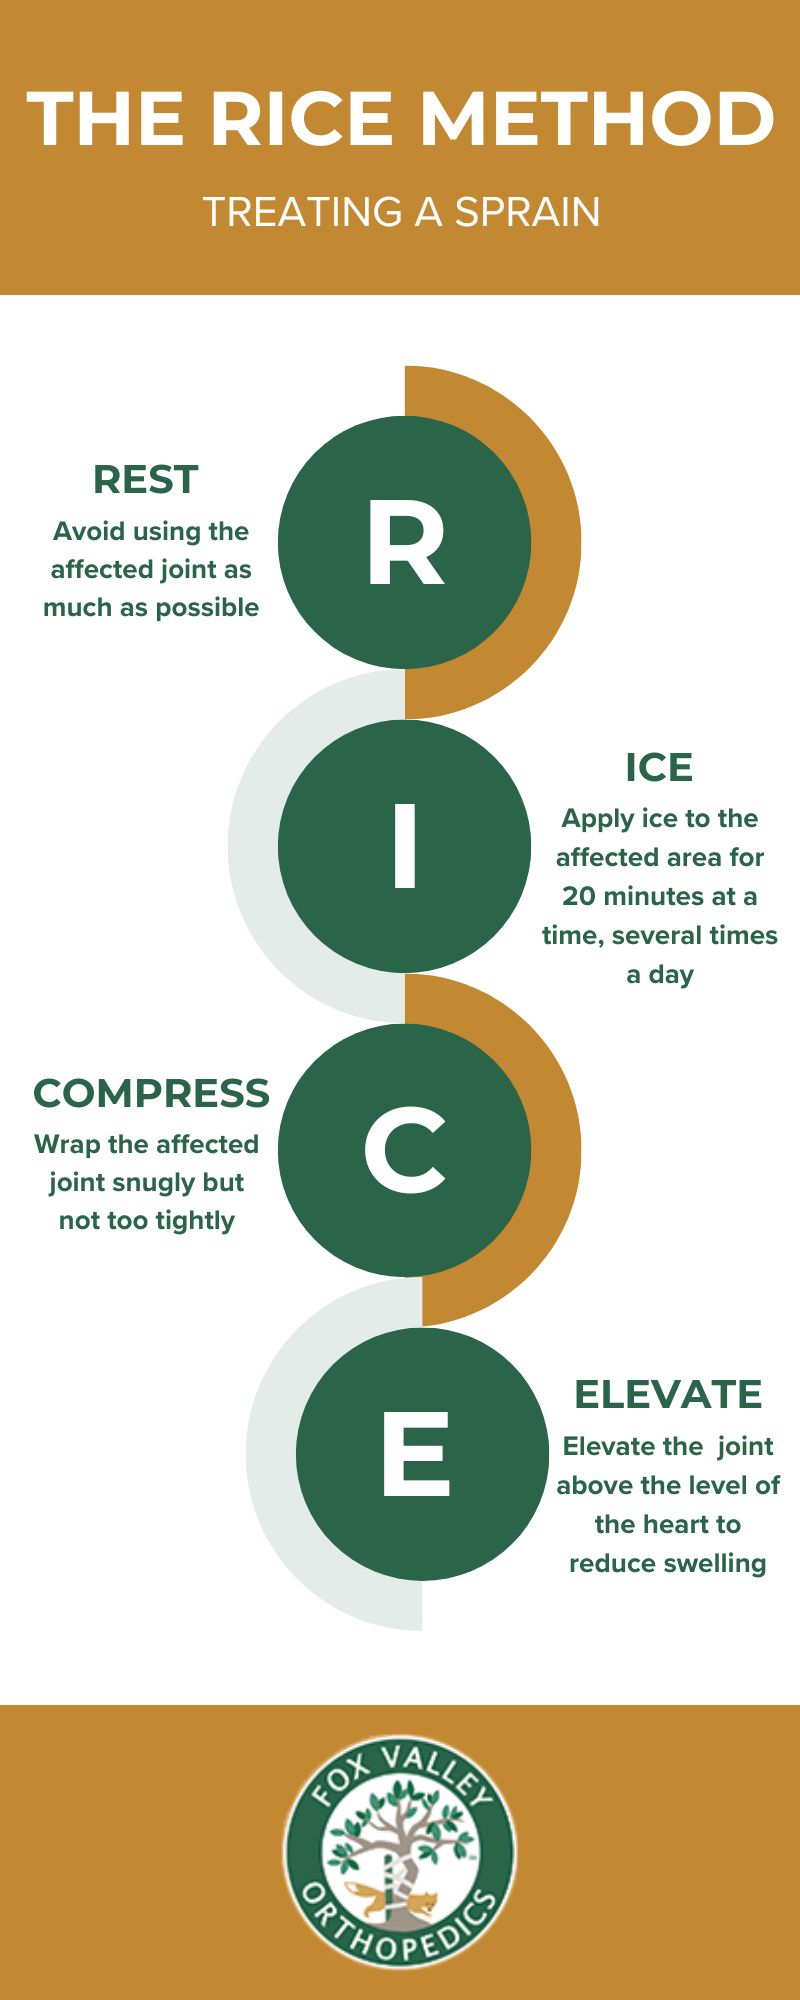 RICE Method for Sprains: Rest, Ice, Compress, Elevate Infographic